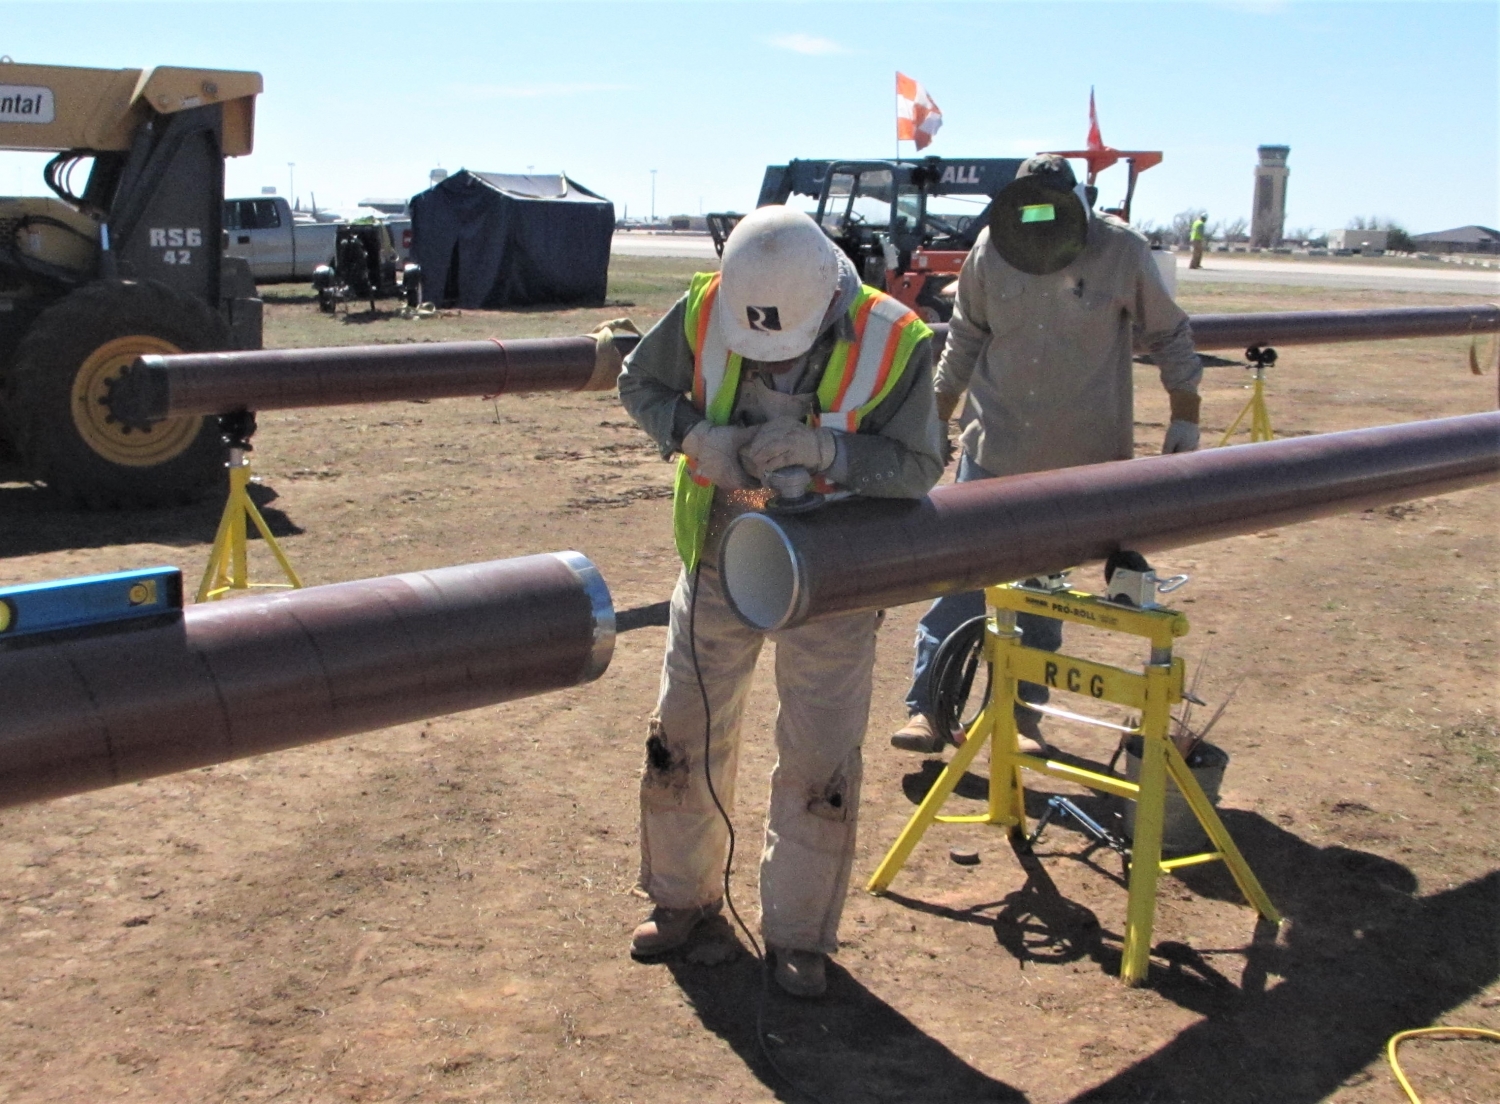 Reliable team members fitting two pieces of a fuel pipeline together.